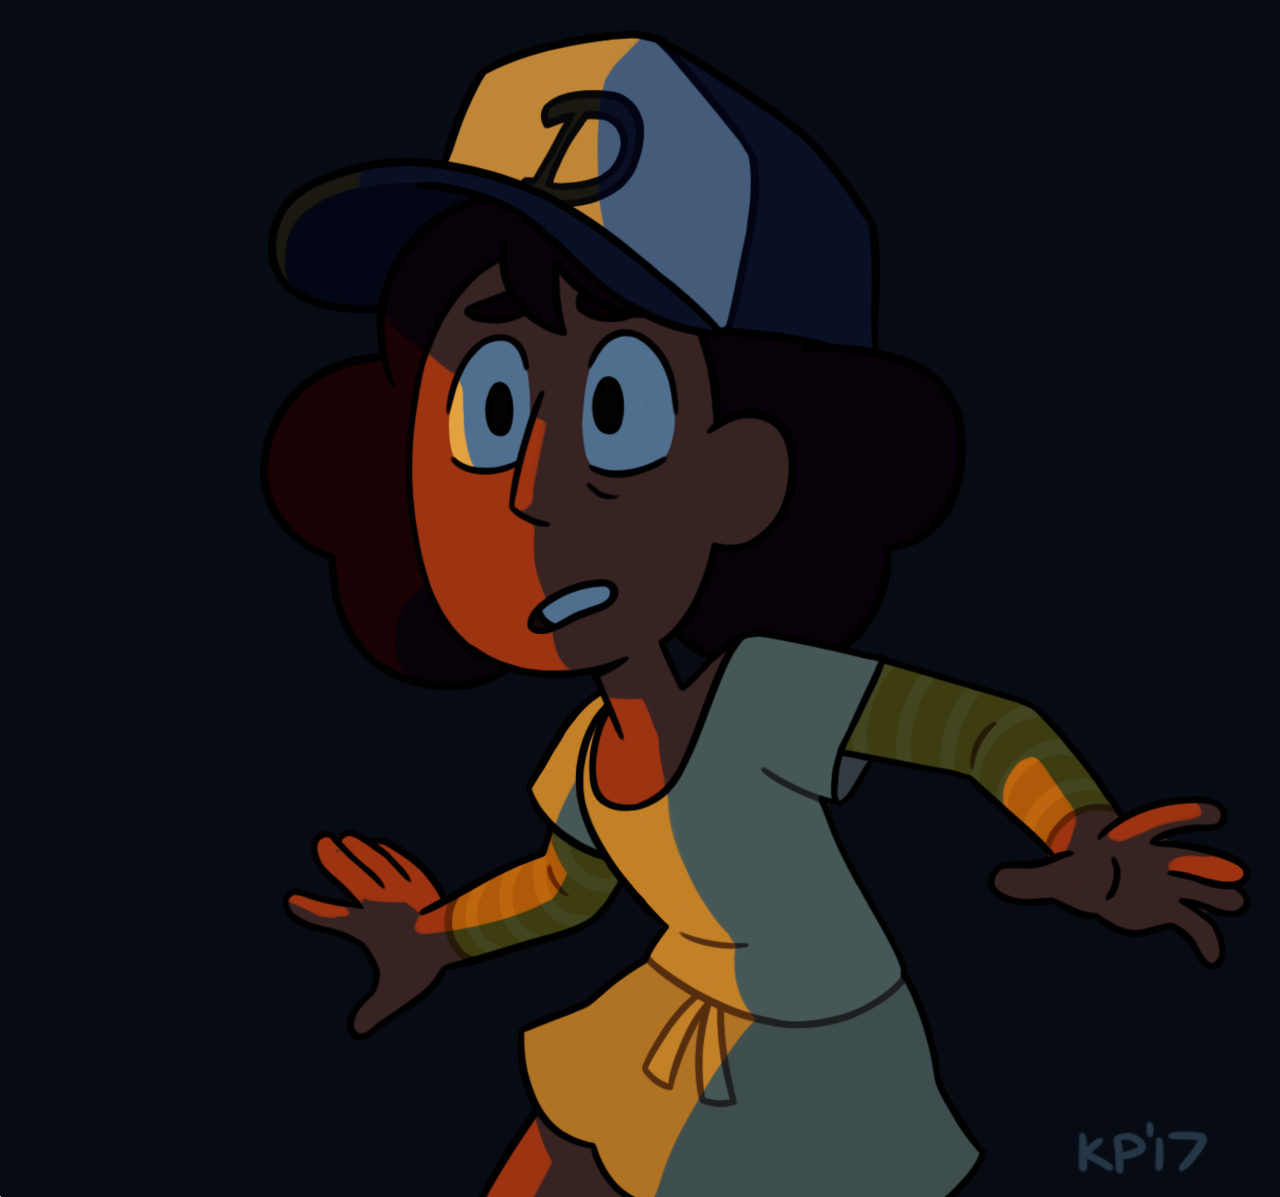 I completely forgot to post this but Connie’s new haircut reminded me of Clementine’s from season 1 of the Walking Dead games so I thought I’d draw a little crossover!